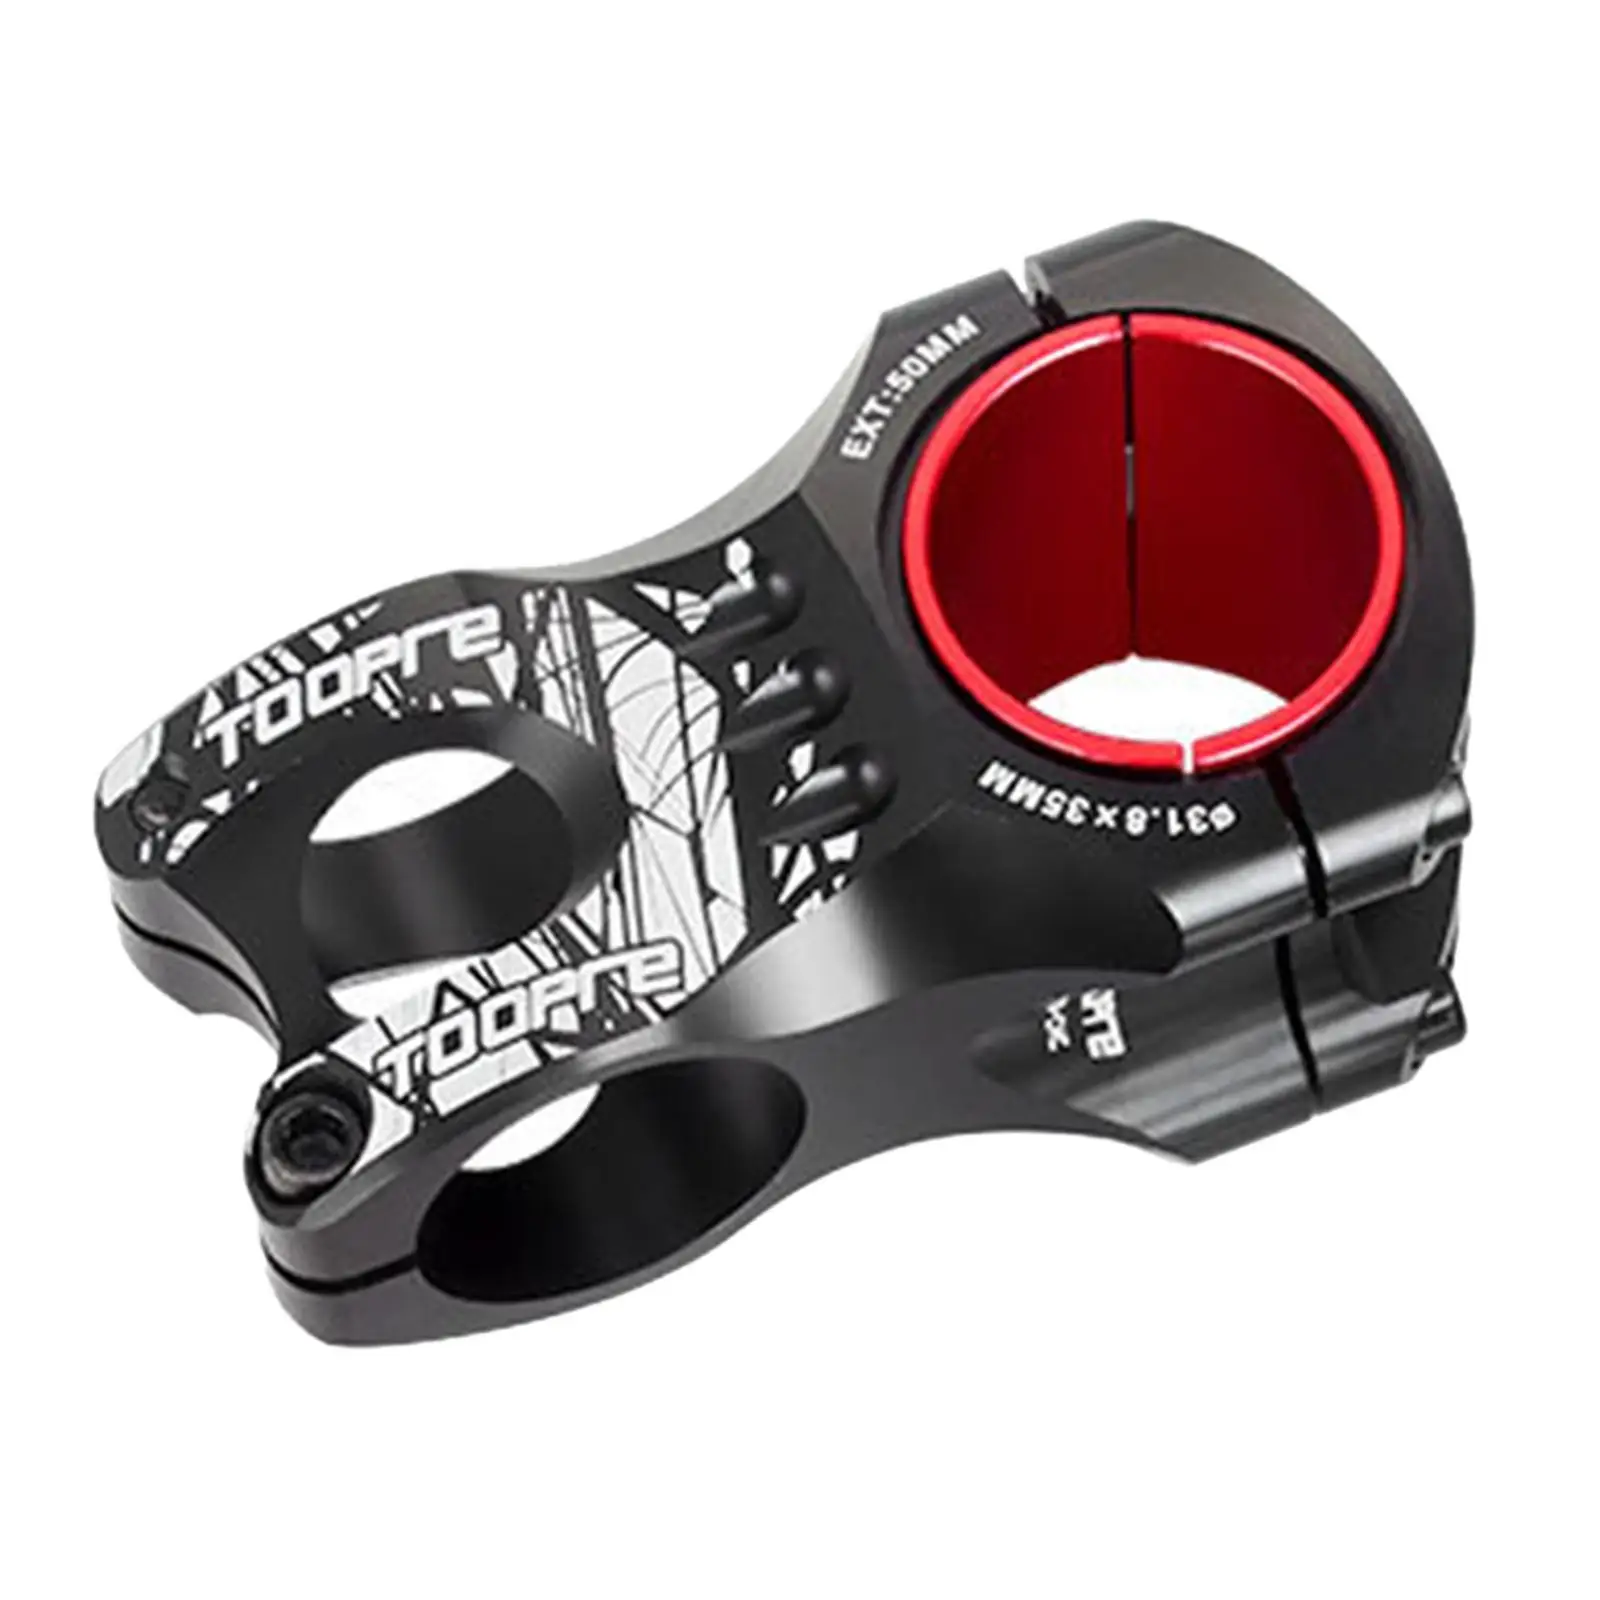 31.8mm/35mm Bike Stem 0 Degree  Replacement 28.6/8 Short Handlebar for  Mountain Road Components BMX Downhill